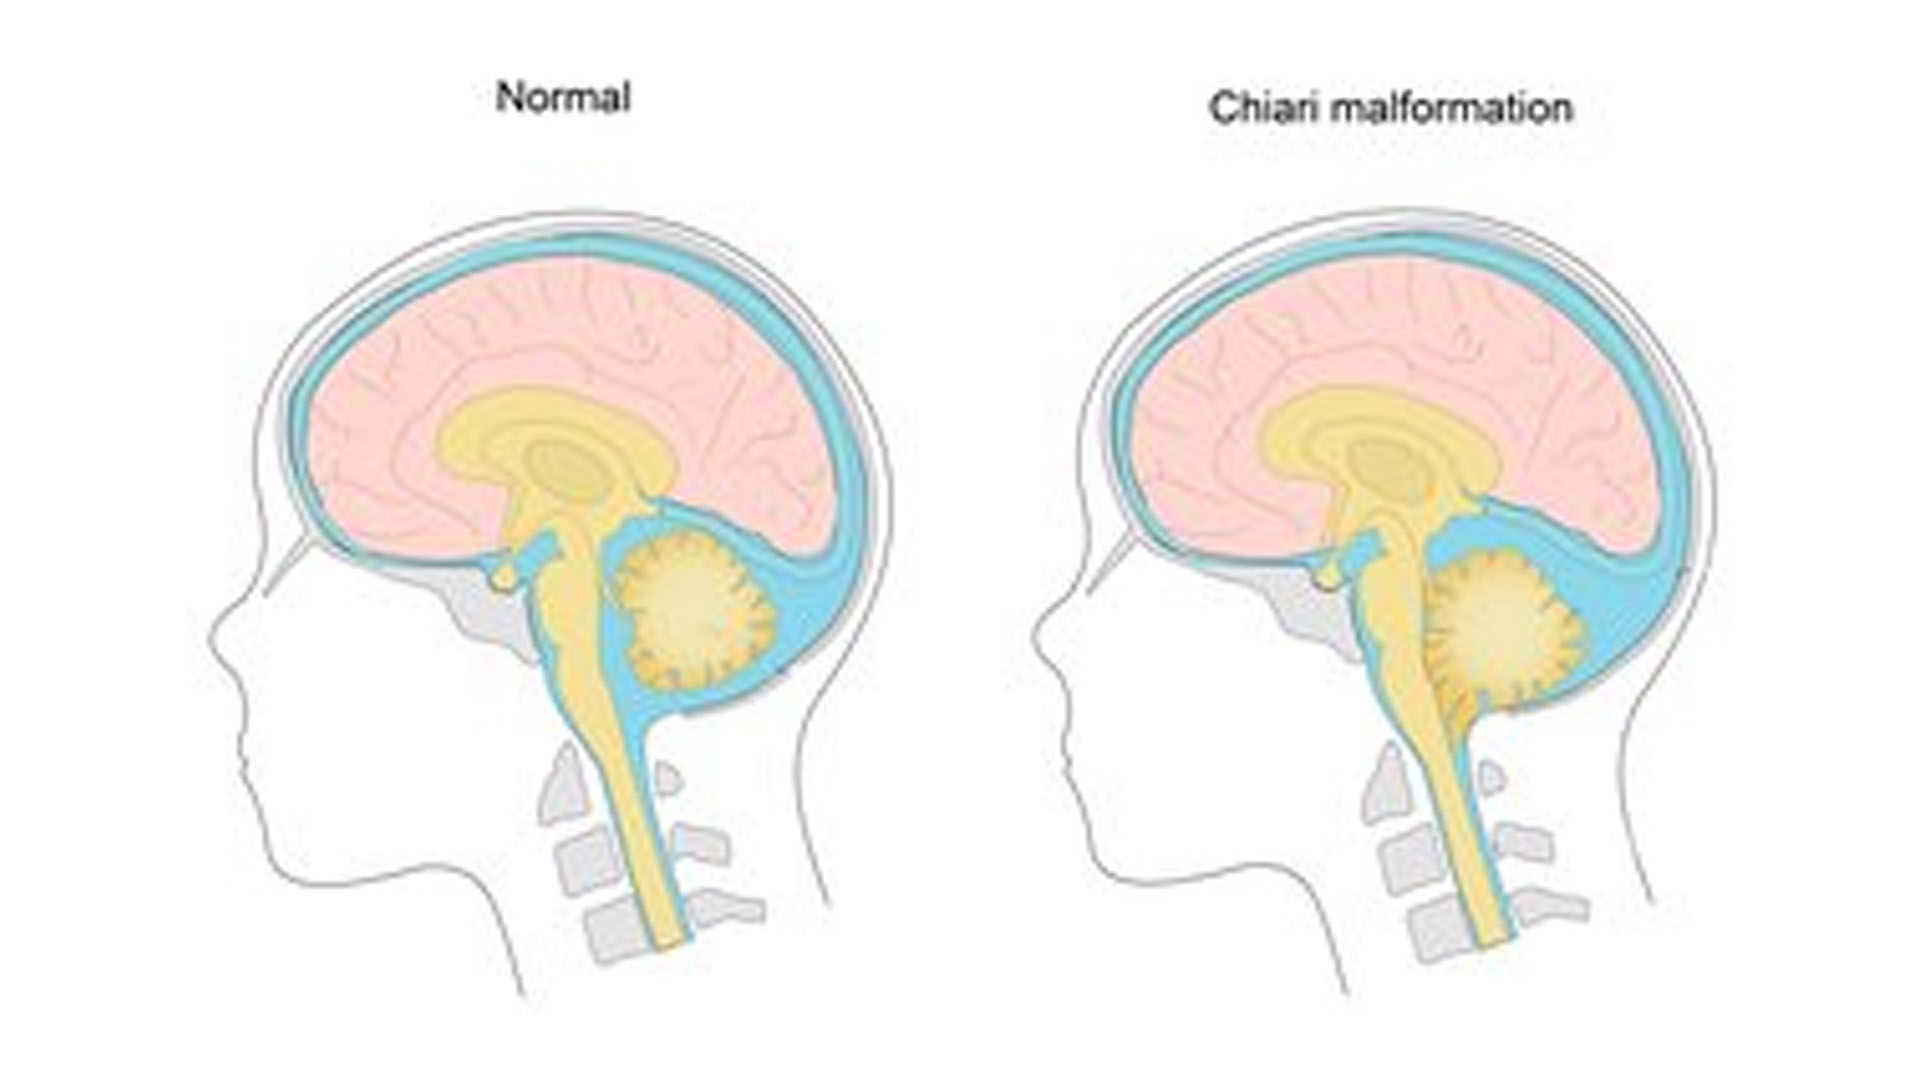 What Is Chiari Malformations?